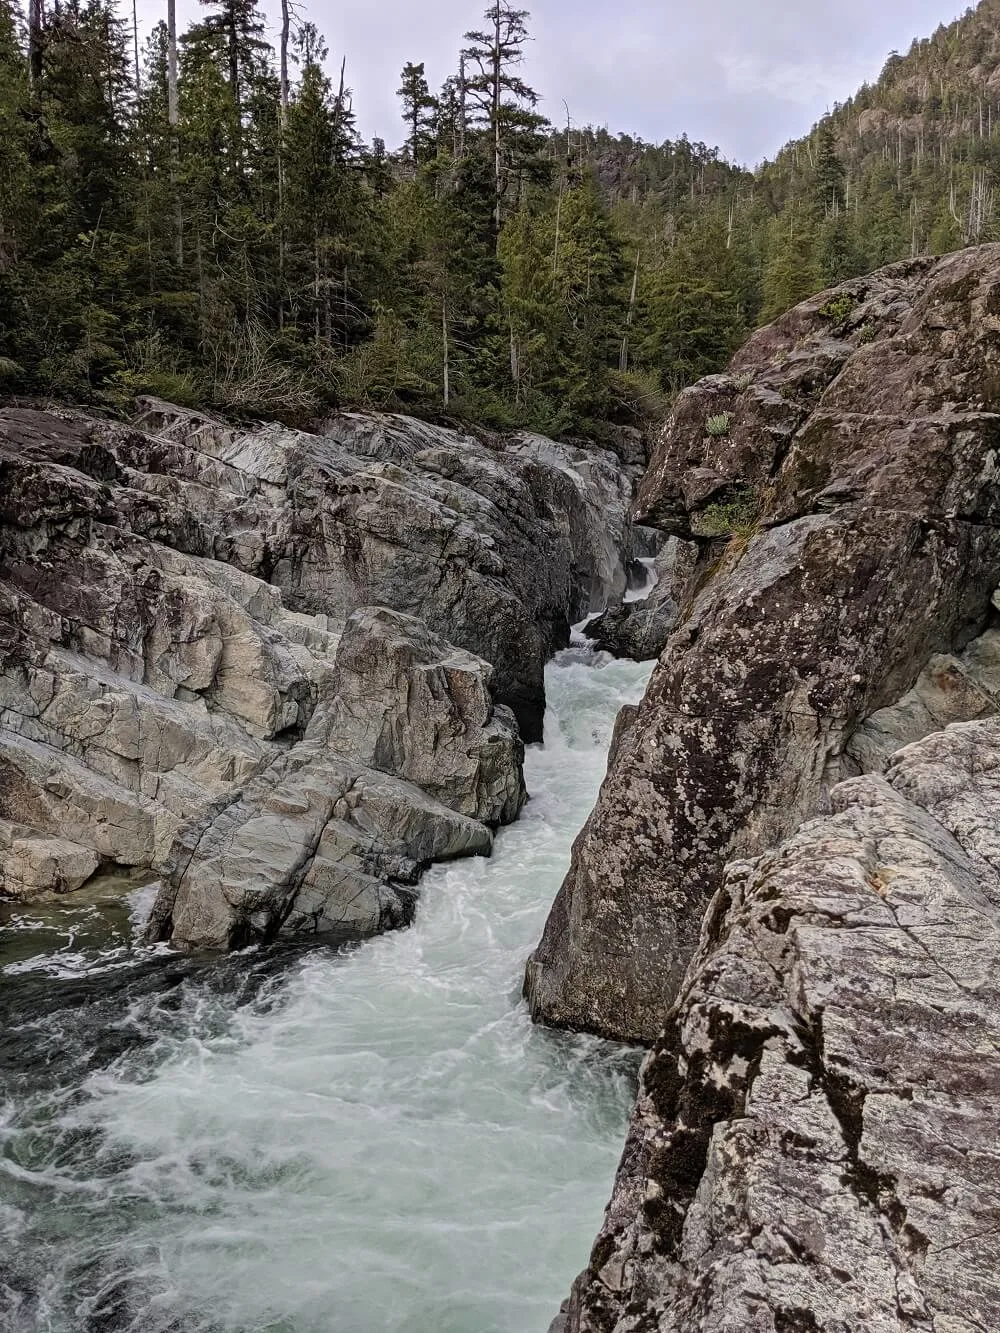 Rocky canyon at Wally's Creek with steep walls and rushing water, forest in background